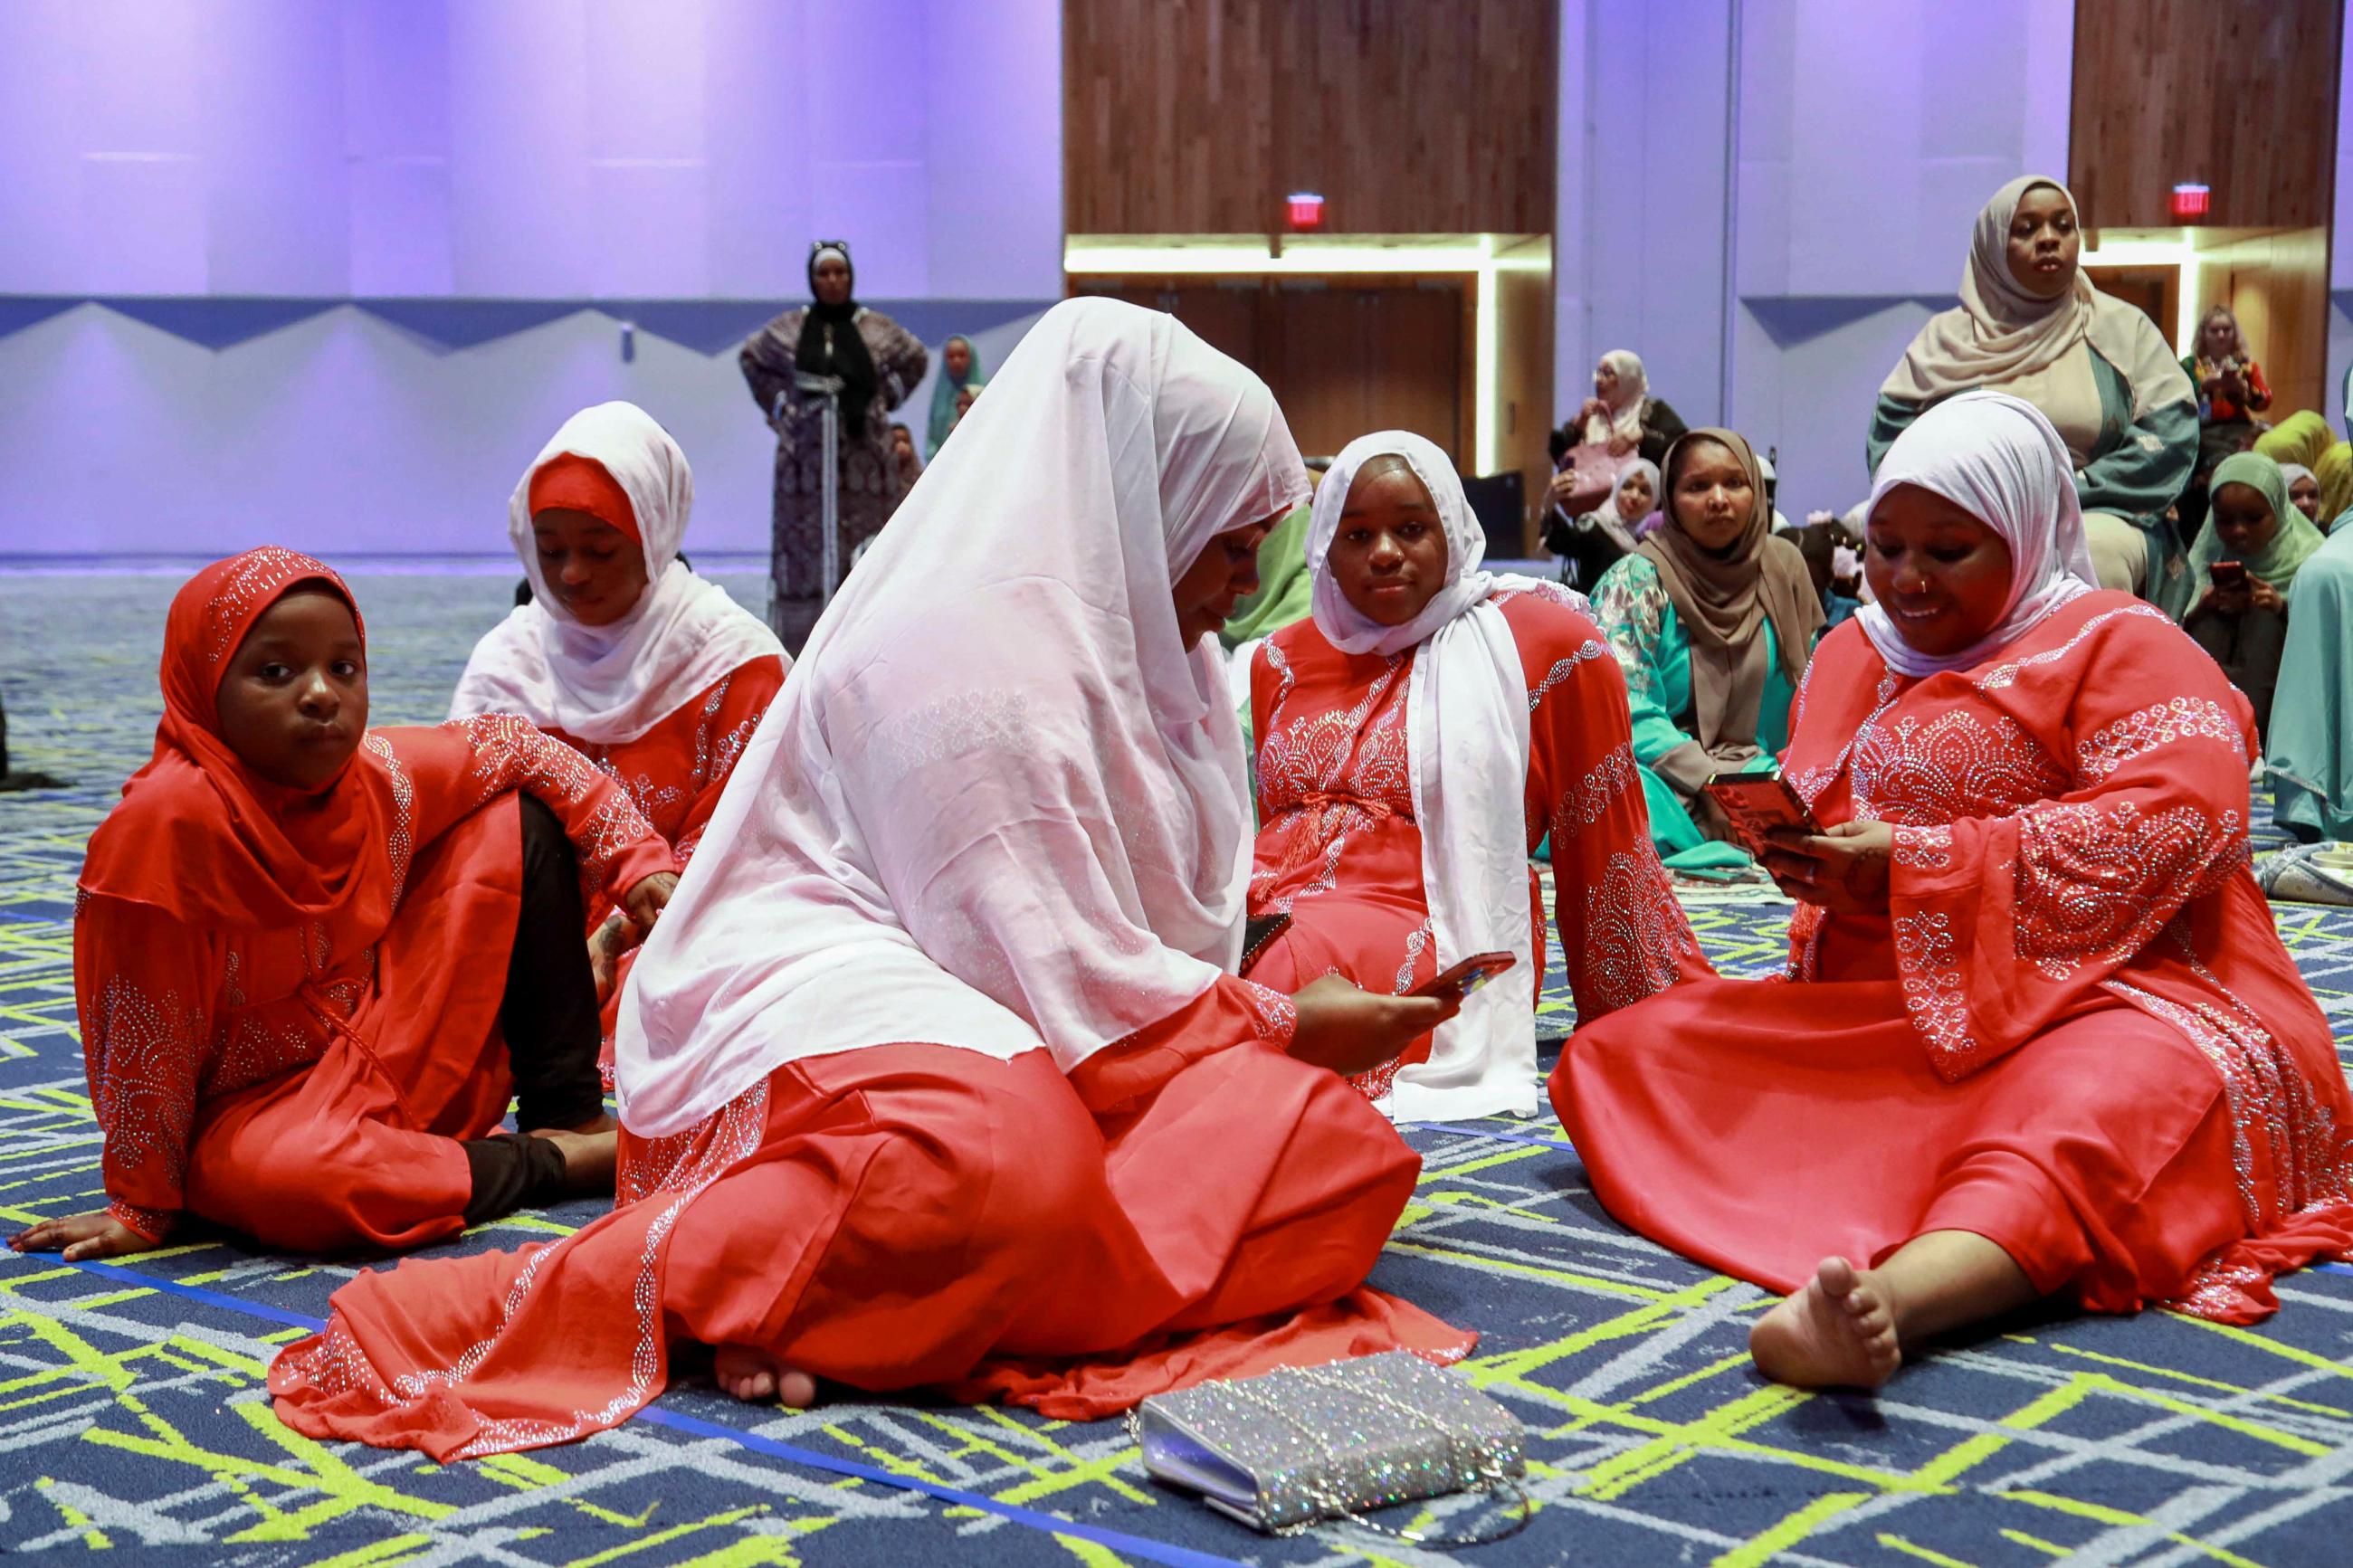 The Alis, an immigrant family from Kenya, sit together on the floor, gathering with the Muslim community at Kentucky International Convention Center to celebrate the Eid al-Adha festival, in Louisville, Kentucky, on July 9, 2022. 